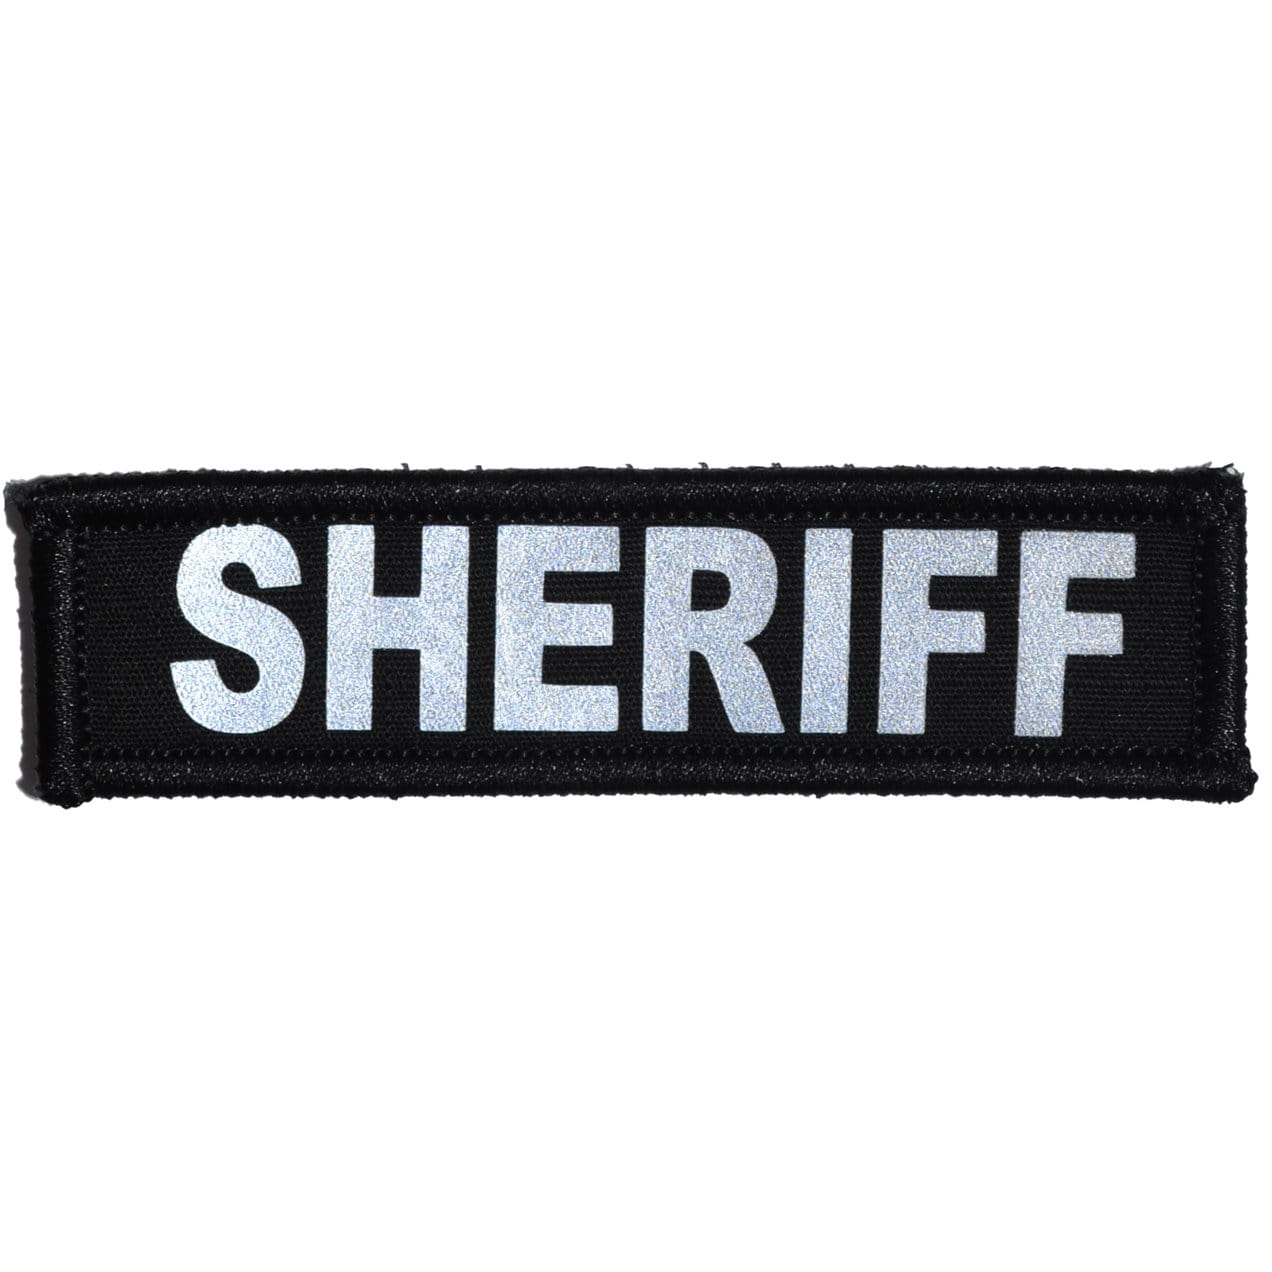 Tactical Gear Junkie Patches Black Sheriff Reflective - 1x3.75 Patch